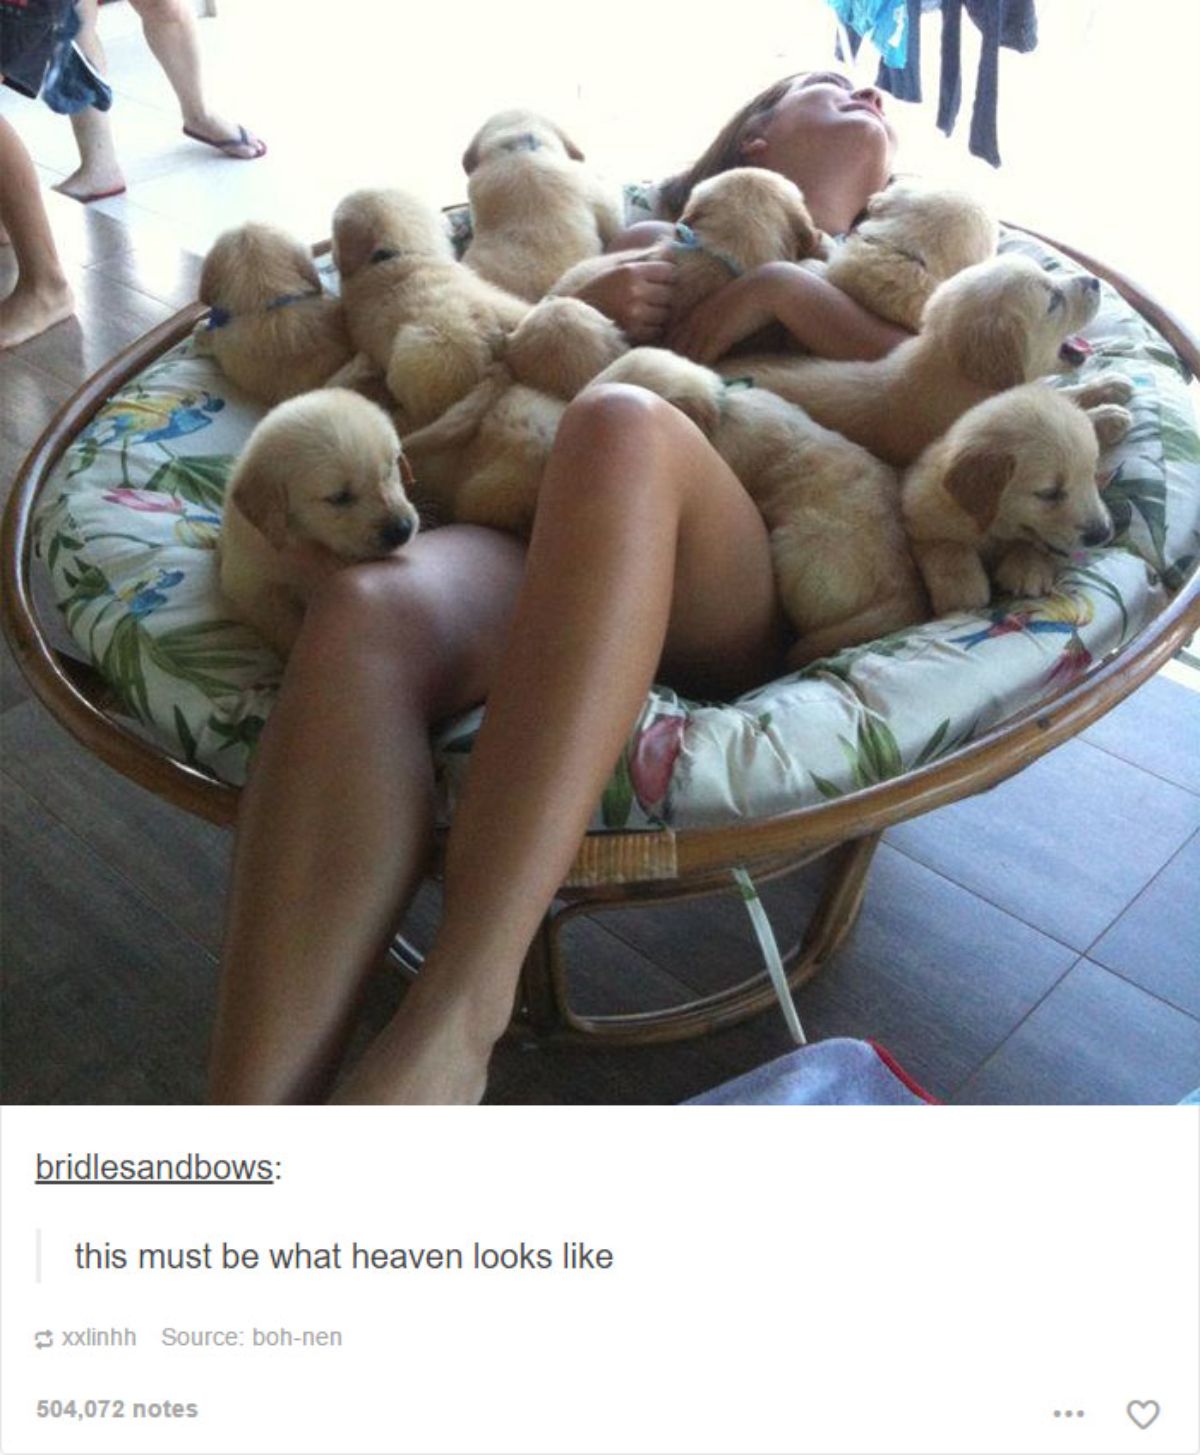 tumblr post of a girl in a chair surrounded by golden retriever puppies with caption saying this is what heaven looks like